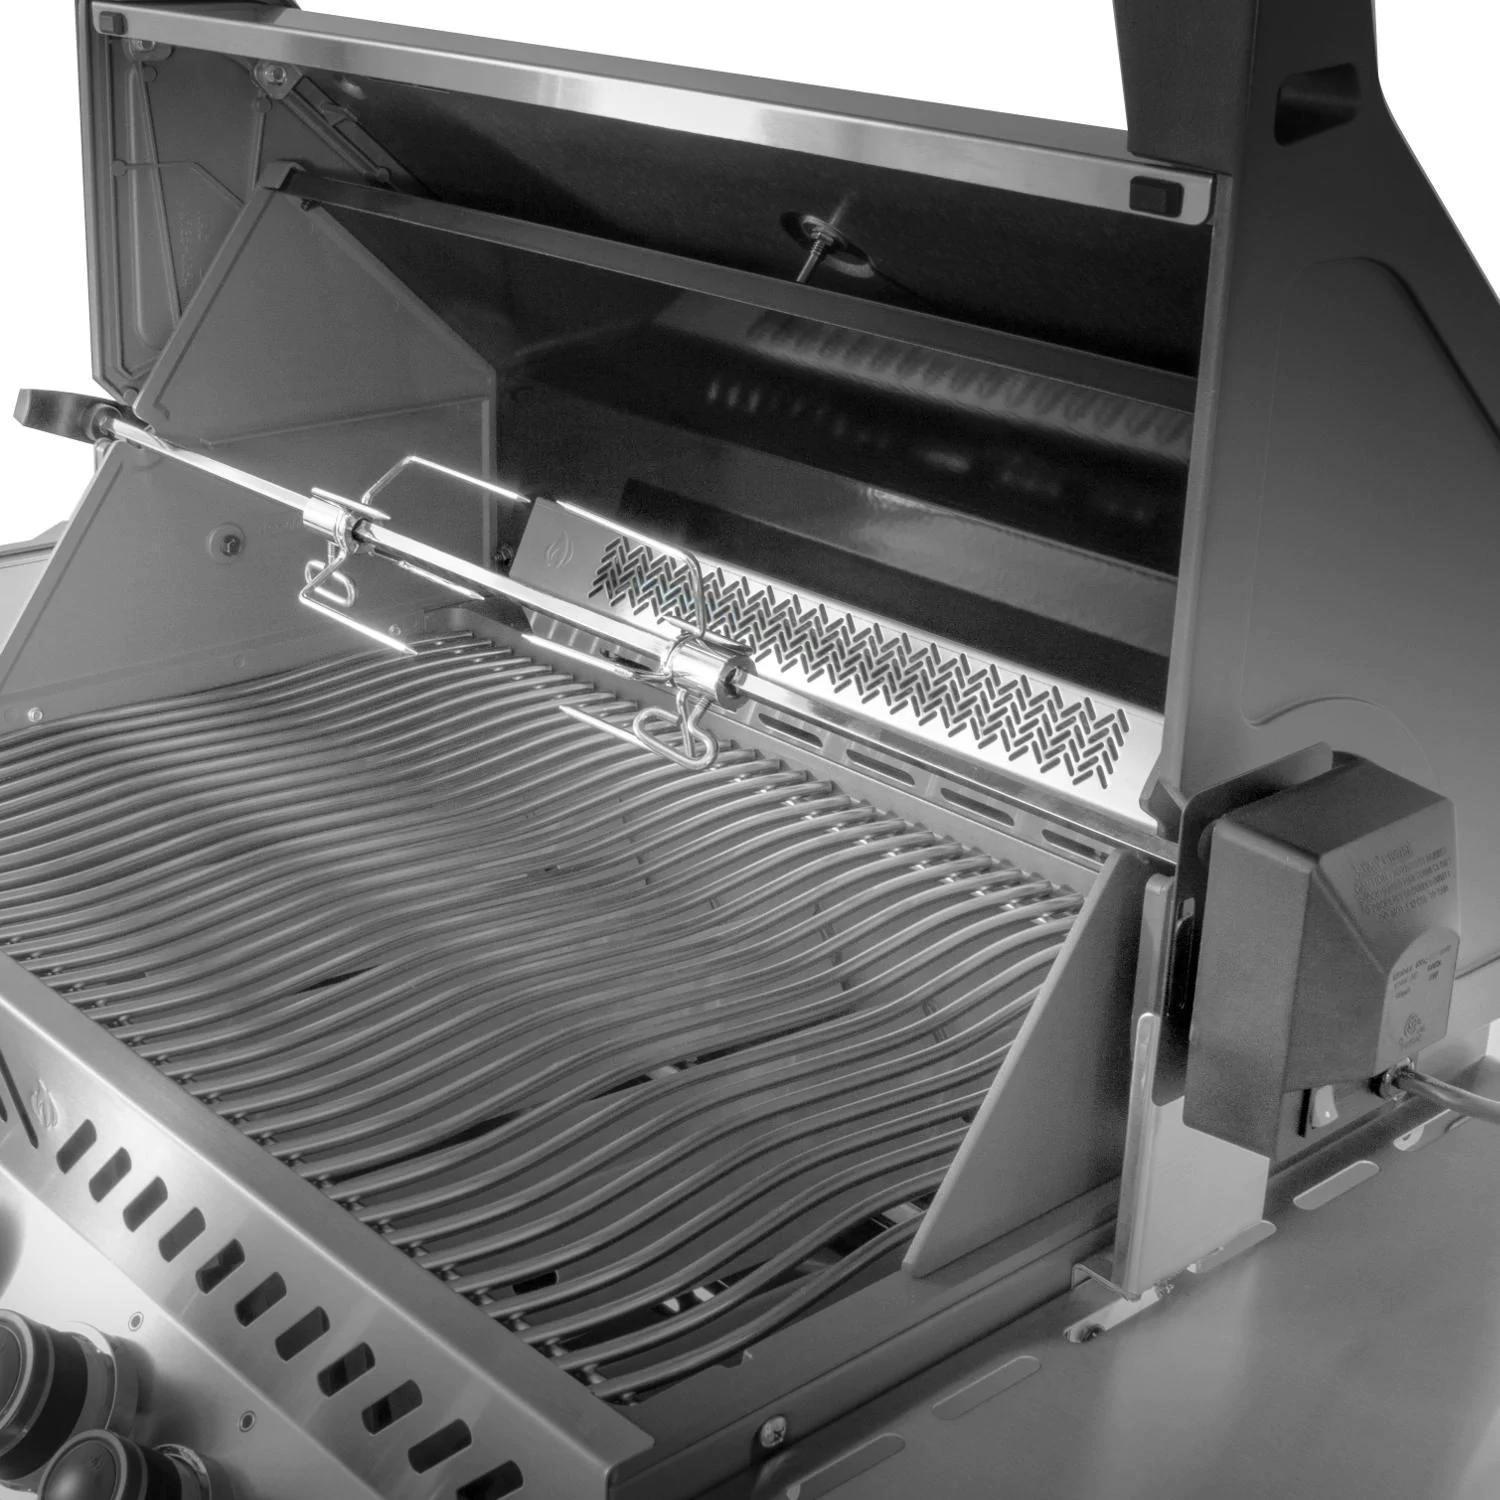 Napoleon Prestige 500 Built-in Gas Grill with Infrared Rear Burner and Rotisserie Kit · Natural Gas